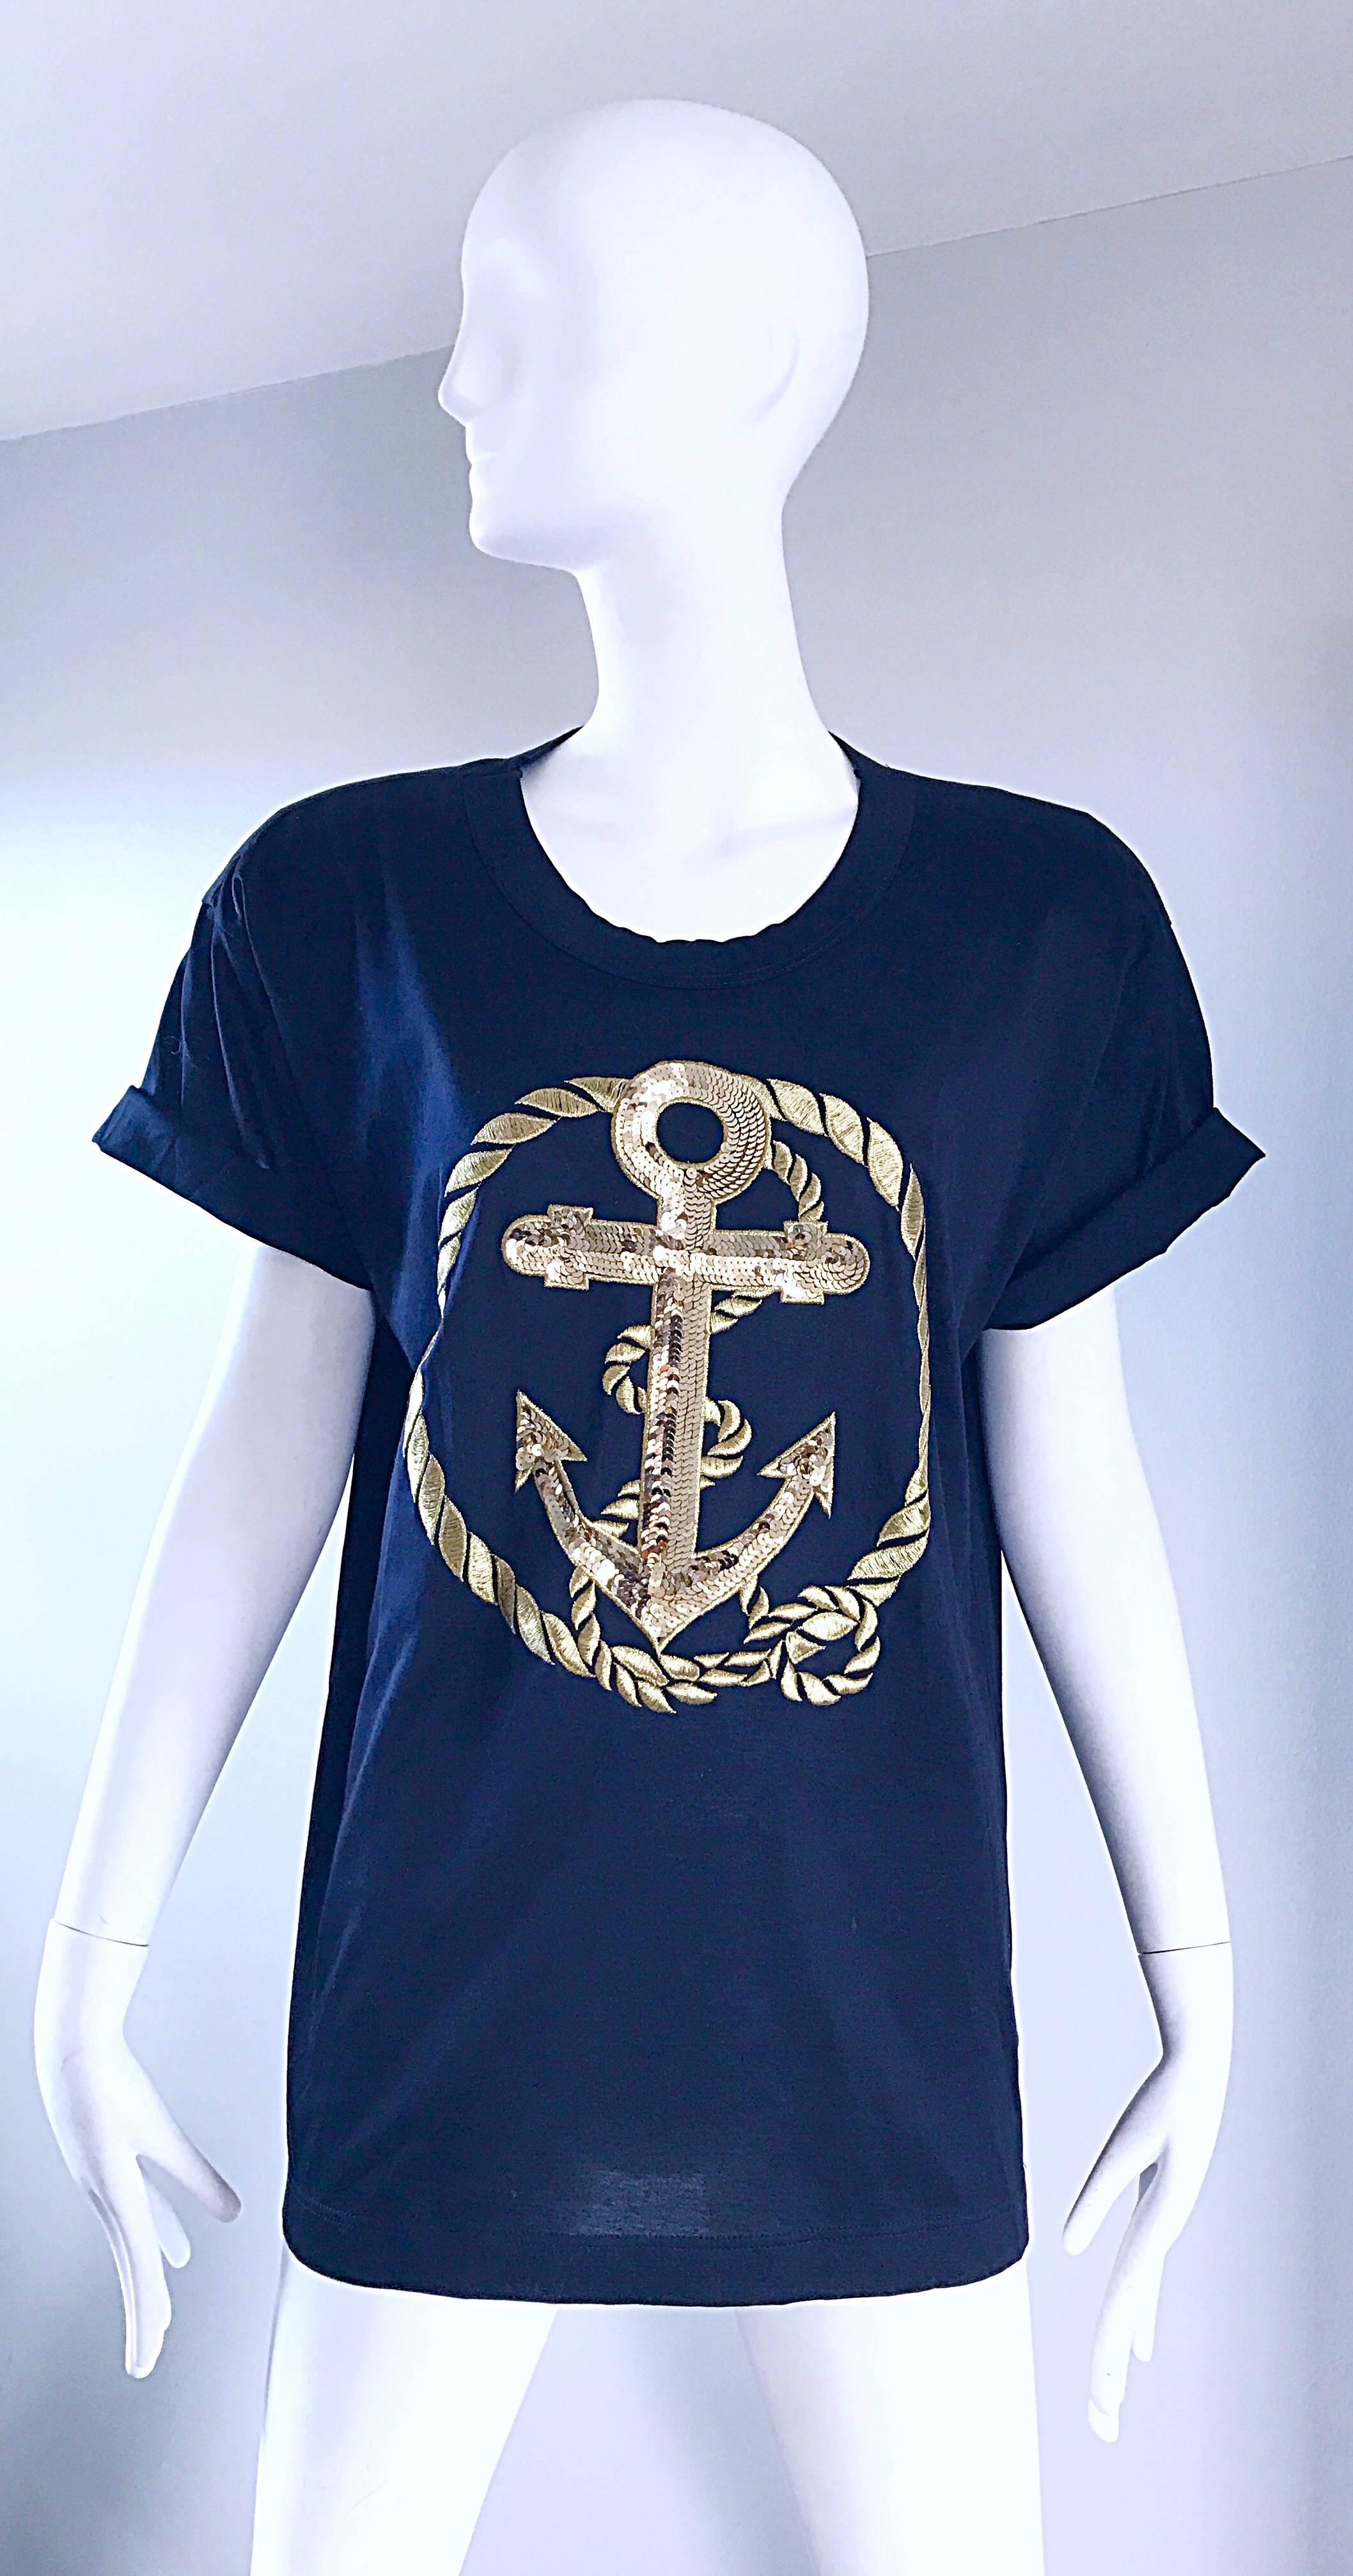 Brand new vintage 1990s / 90s ESCADA, by MARGARETHA LEY navy blue and gold sequined nautical t-shirt blouse! Soft navy blue cotton, with a large gold sequin anchor. Shoulder pads, which can easily be snapped off. Sleeves can be rolled up, as